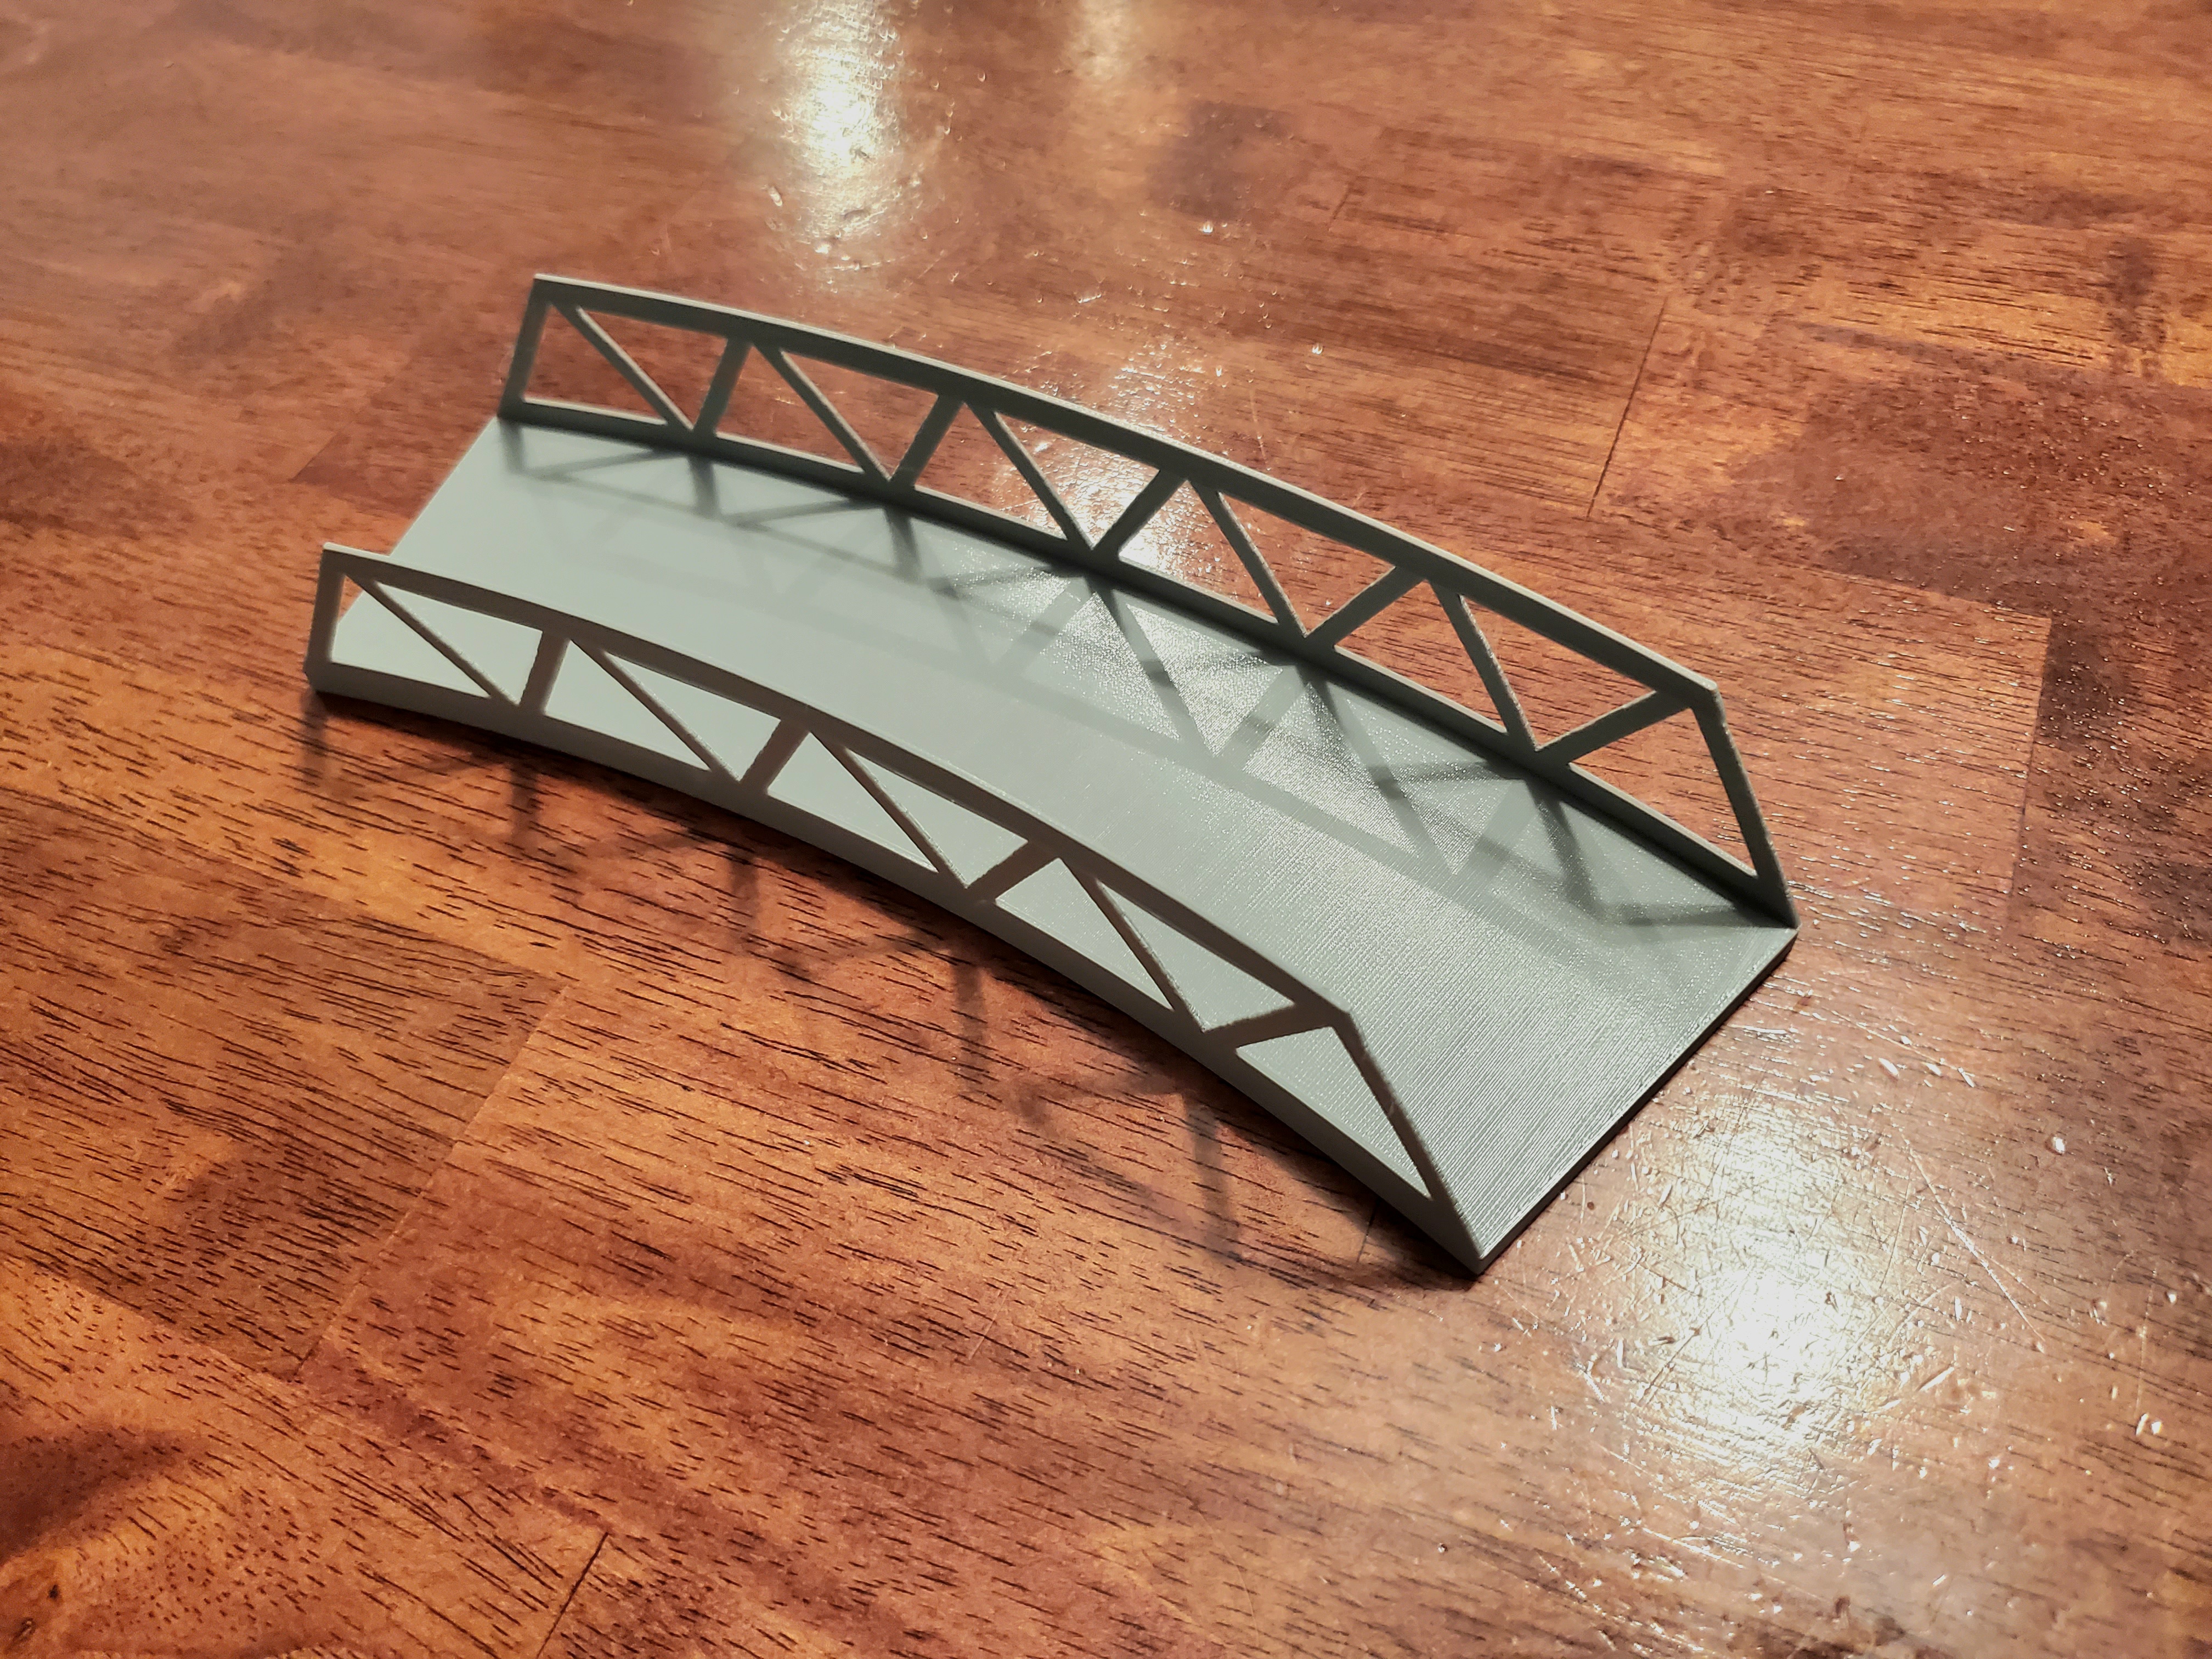 Curved truss bridge for HO trains